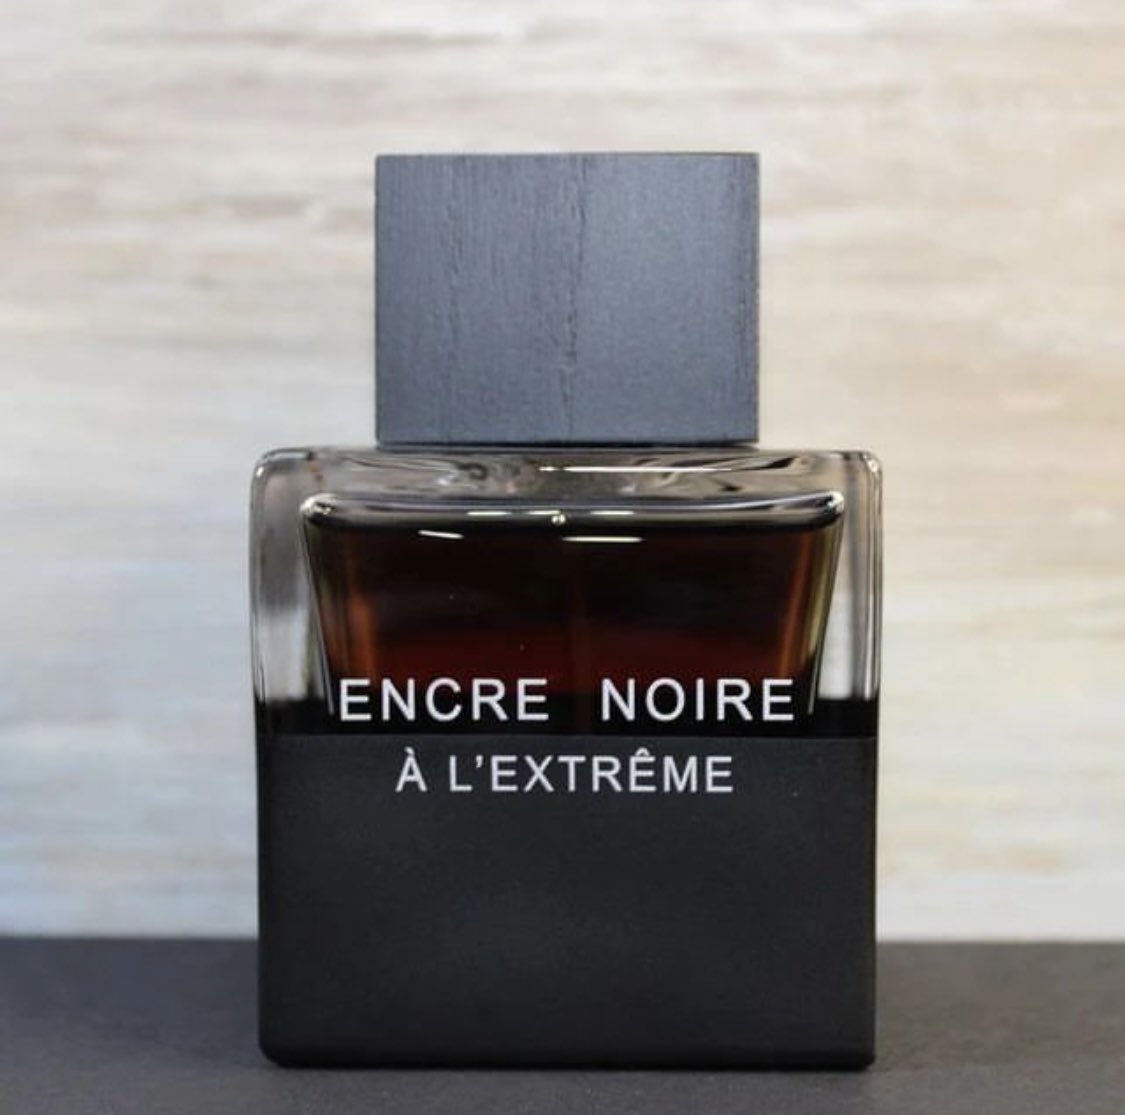 If you like earthy powerful vetiver, this if for you. It is a warm dry, resinous, earthy, inviting, enveloping darkness. It is creamy, smooth, & masculine with excellent longevity & projection 👍 . . Encre Noire À L’Extrême EDP for men, available in 100ml. Price: N63,000